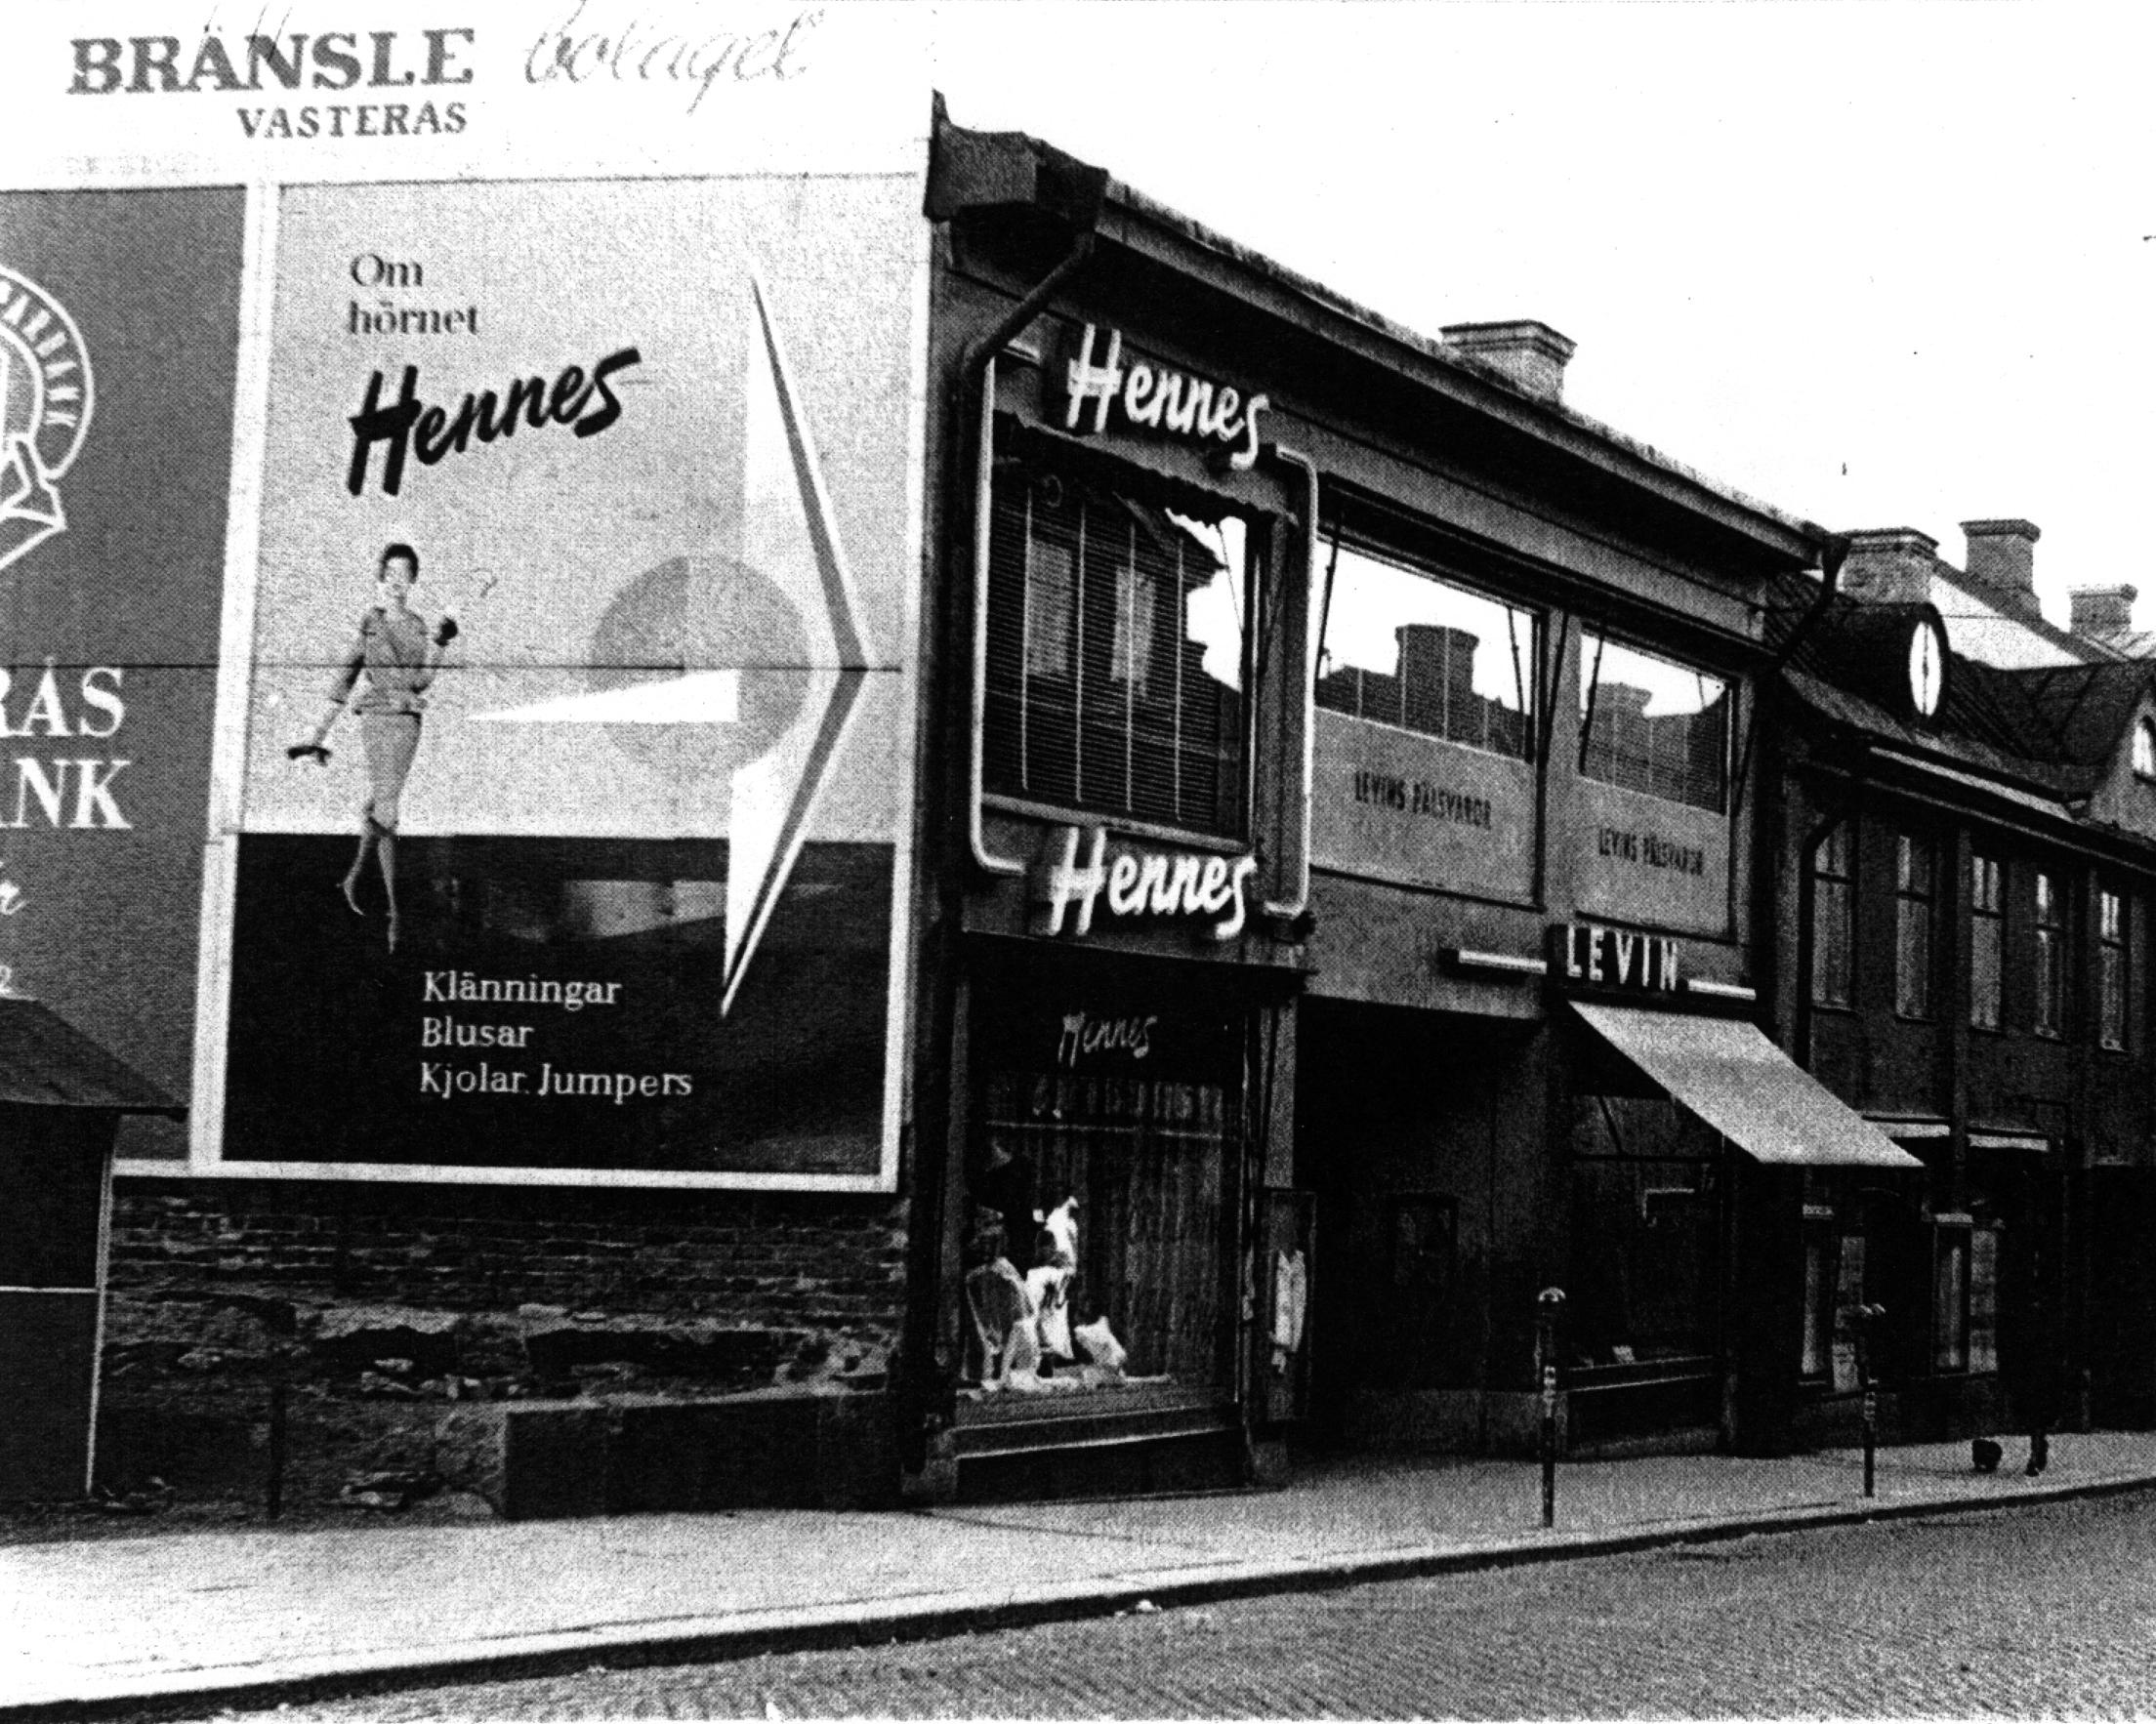 A black-and-white photo showing an H&amp;M store.